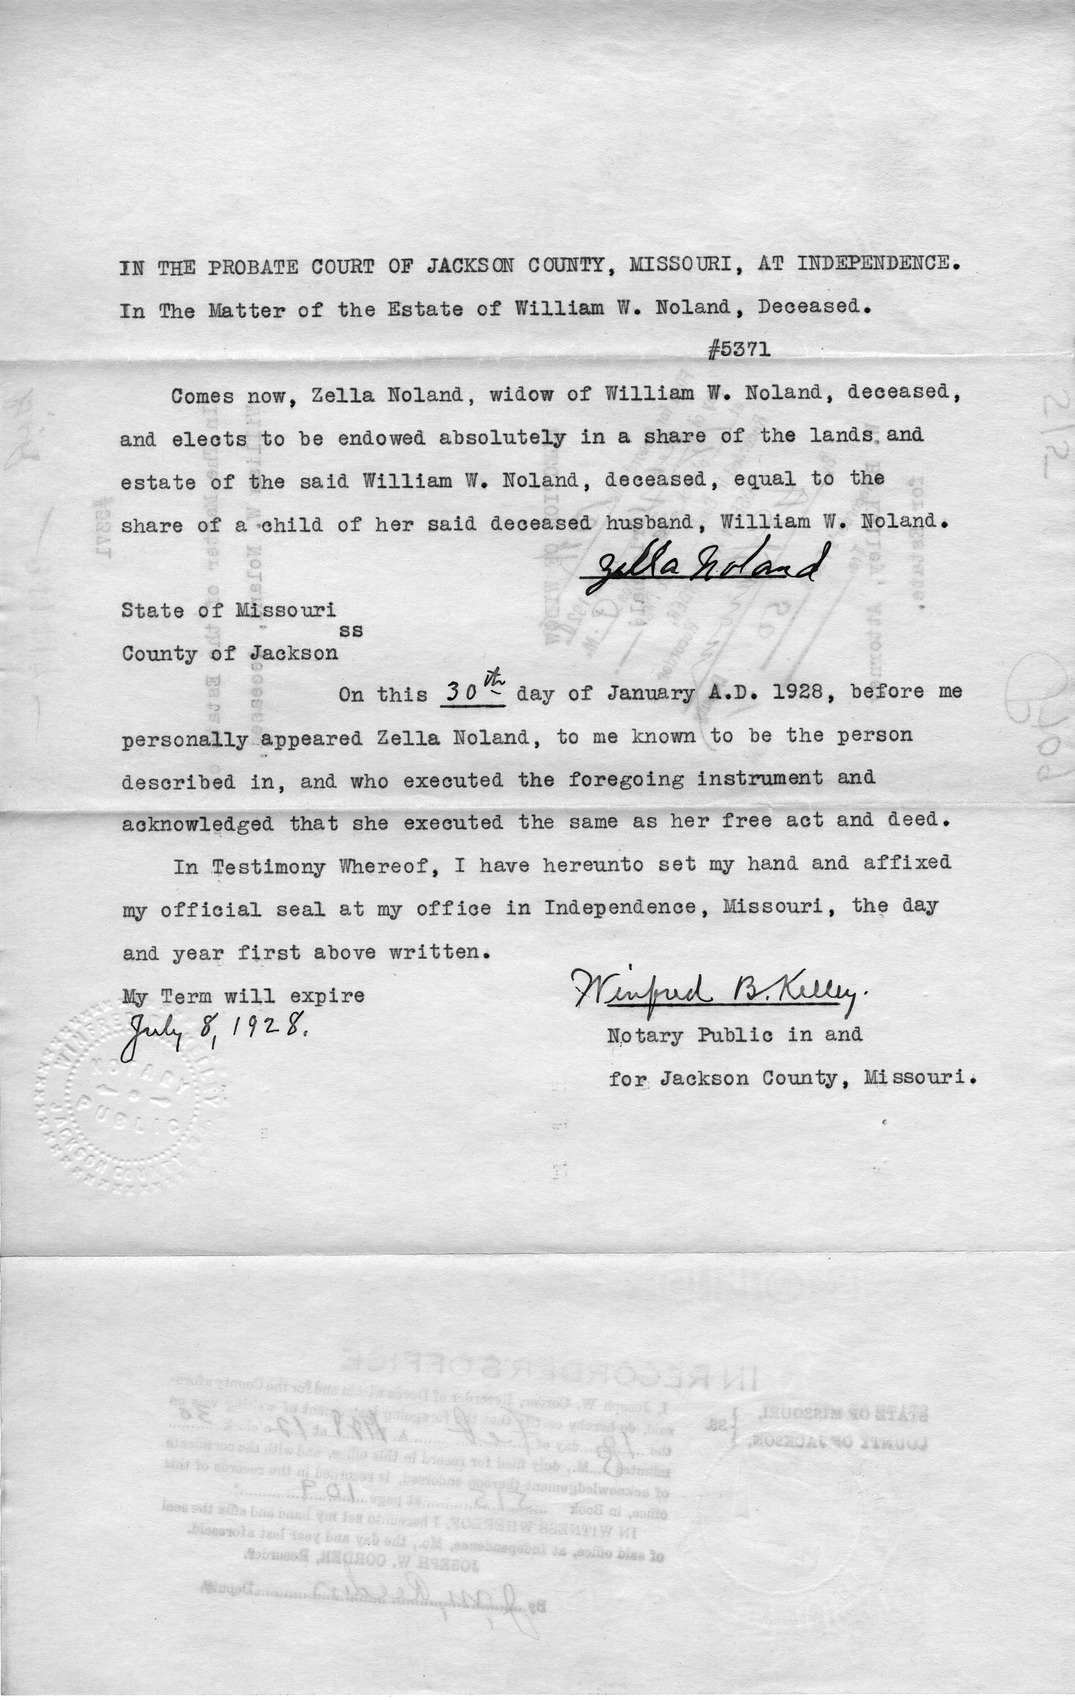 Election of Widow in the Matter of the Estate of William W. Noland, Deceased